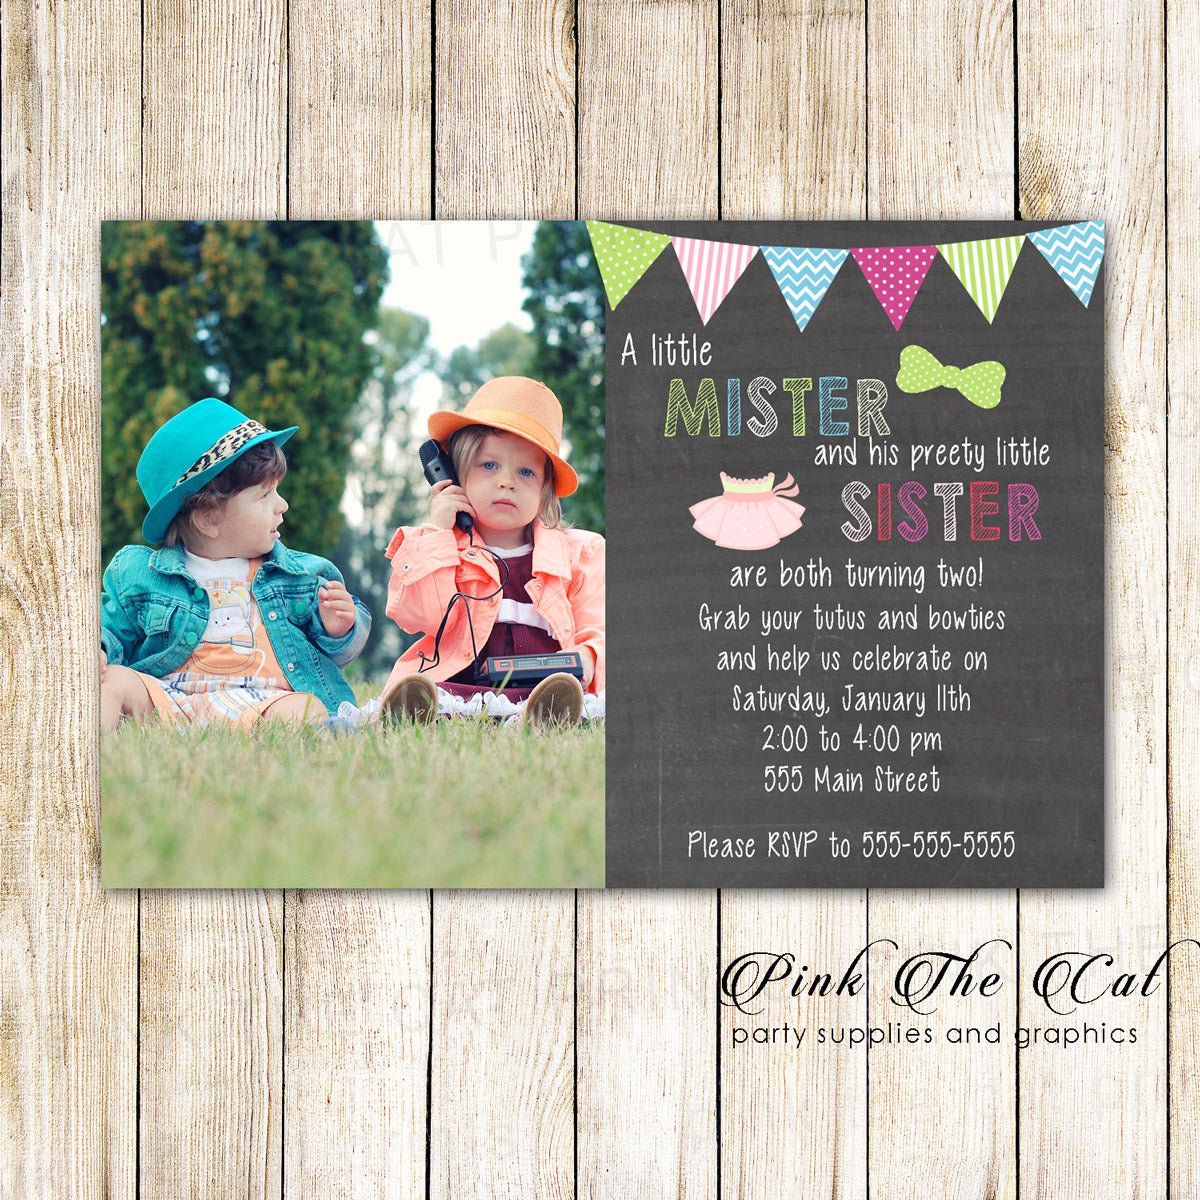 30 Cards Mister and Sister Photo Invitation Tutu Bow Tie